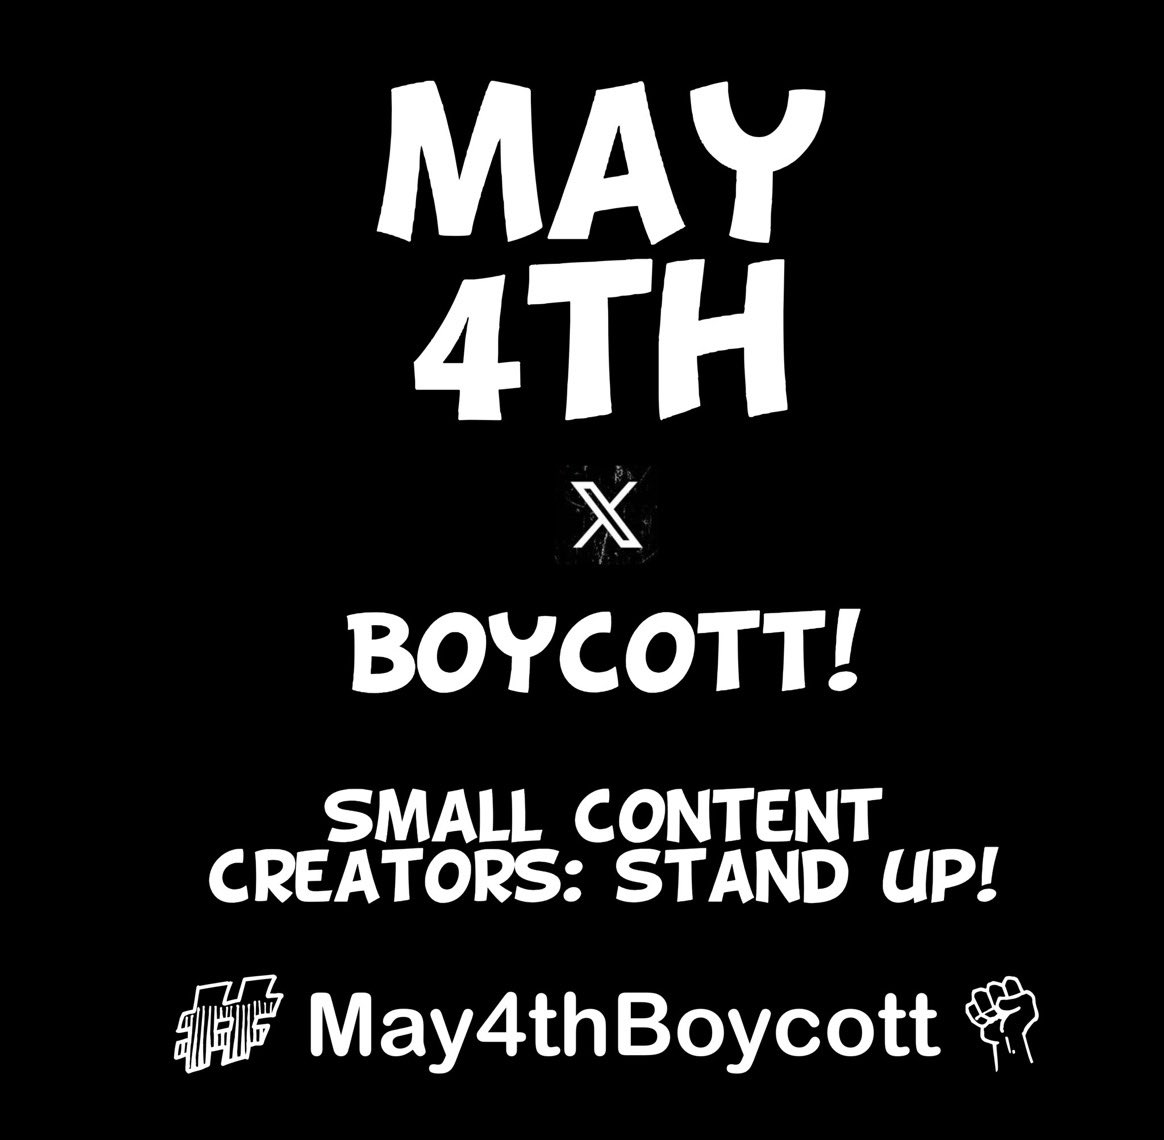 🚨REMINDER!🚨 Tomorrow May 4th, myself and many other accounts will boycotting Twitter/X for 24 hours due to the increase in shadow banning and censorship. #May4thBoycott Here’s your chance to let them know, that we know what they’re doing. Maybe it makes no difference.…